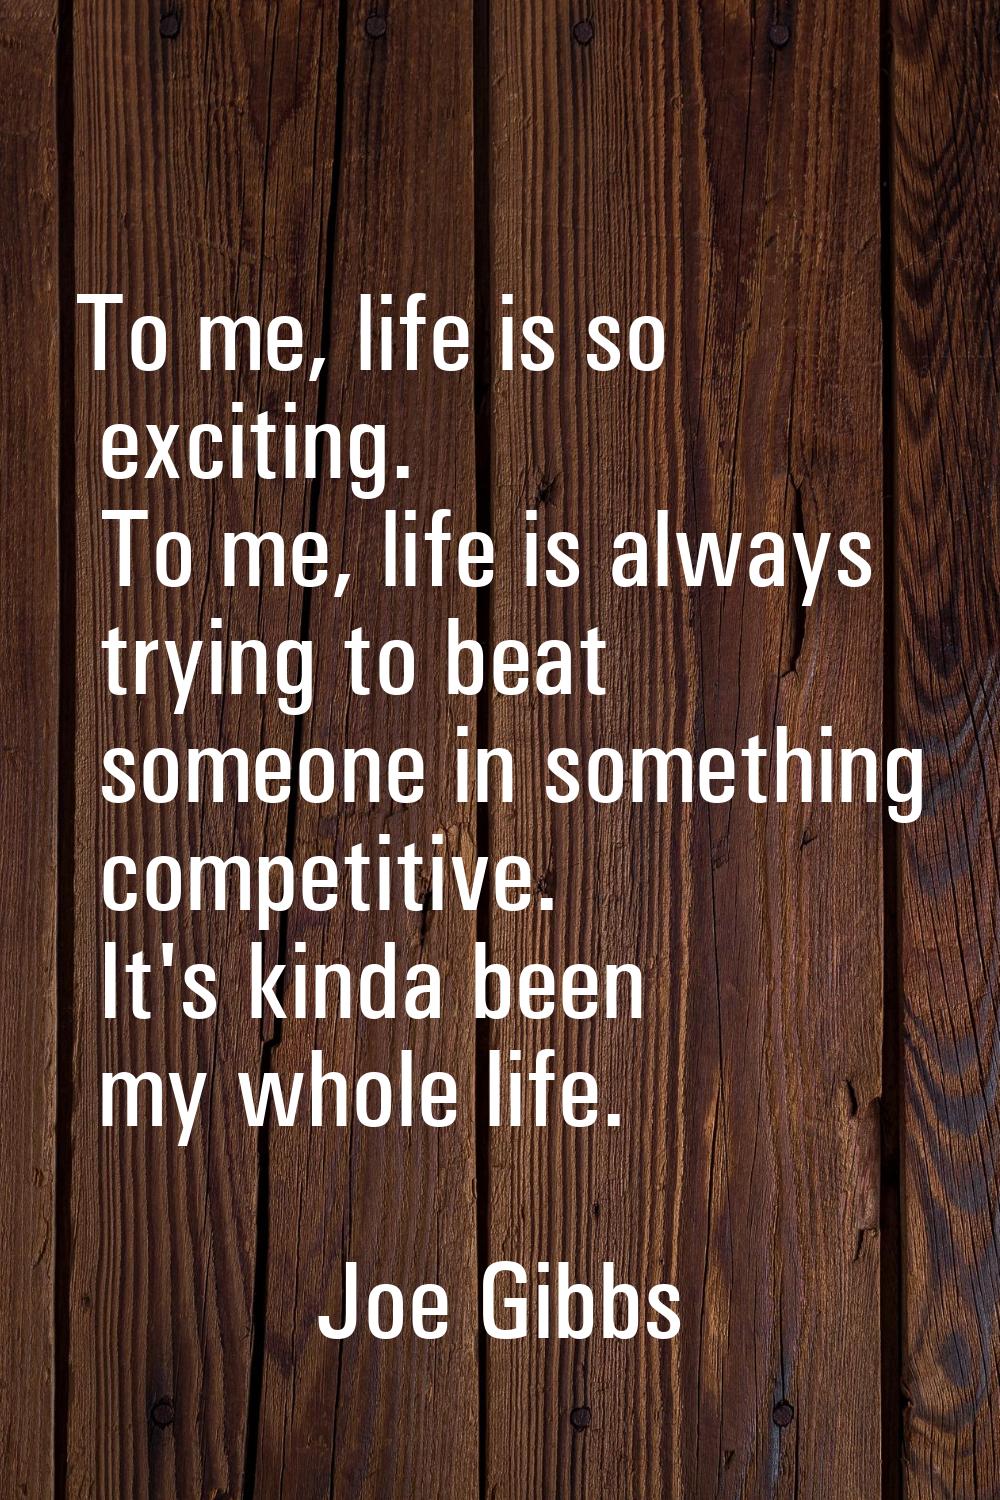 To me, life is so exciting. To me, life is always trying to beat someone in something competitive. 